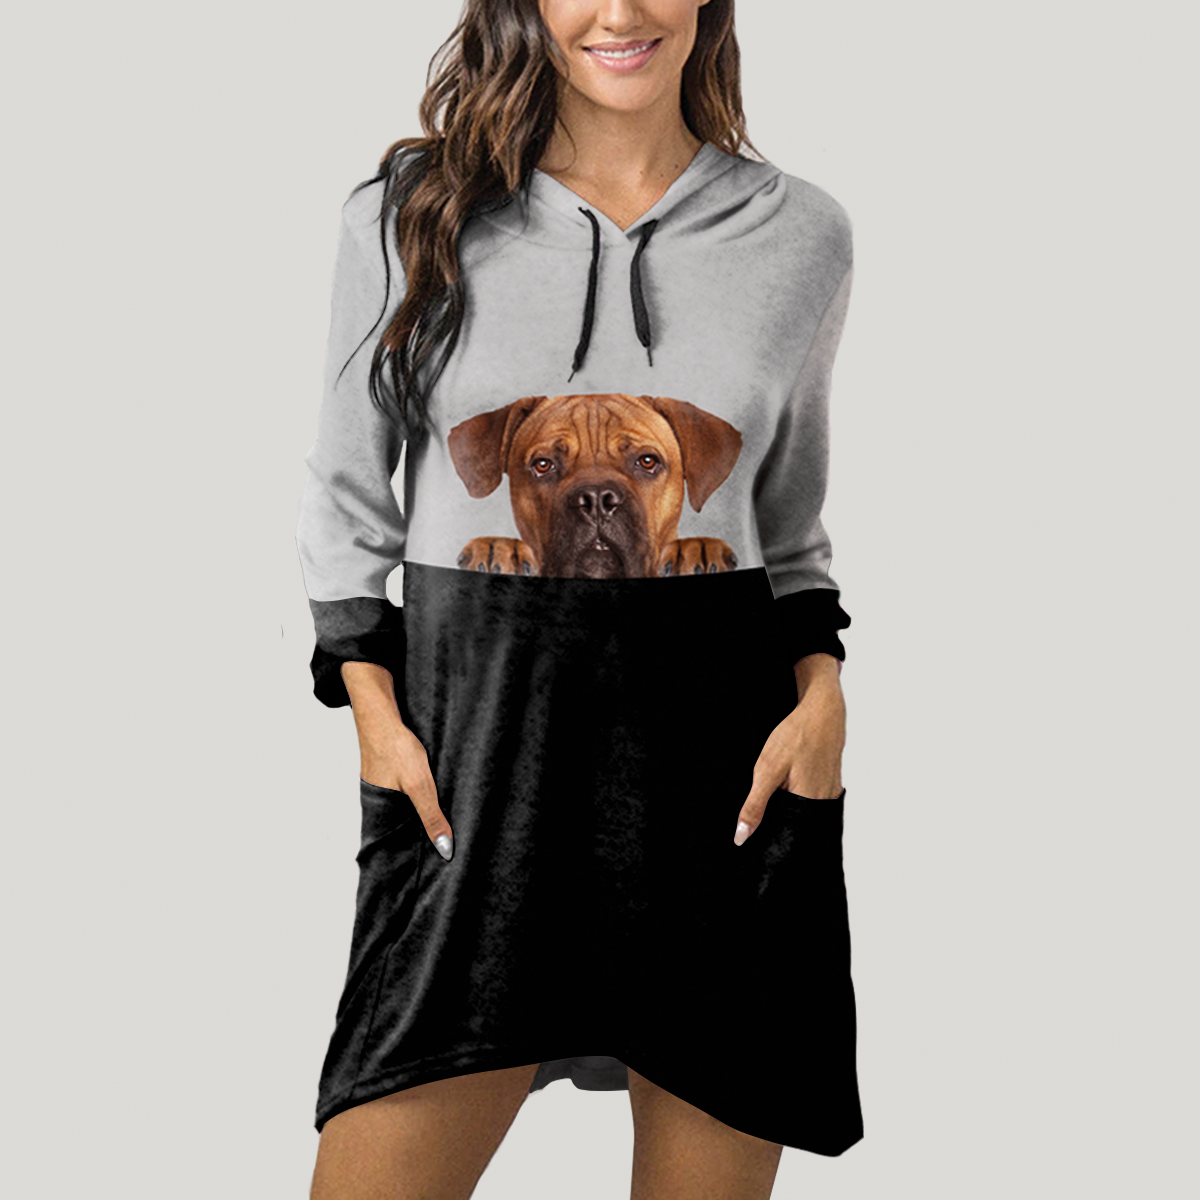 Can You See Me Now - Cane Corso Hoodie With Ears V1